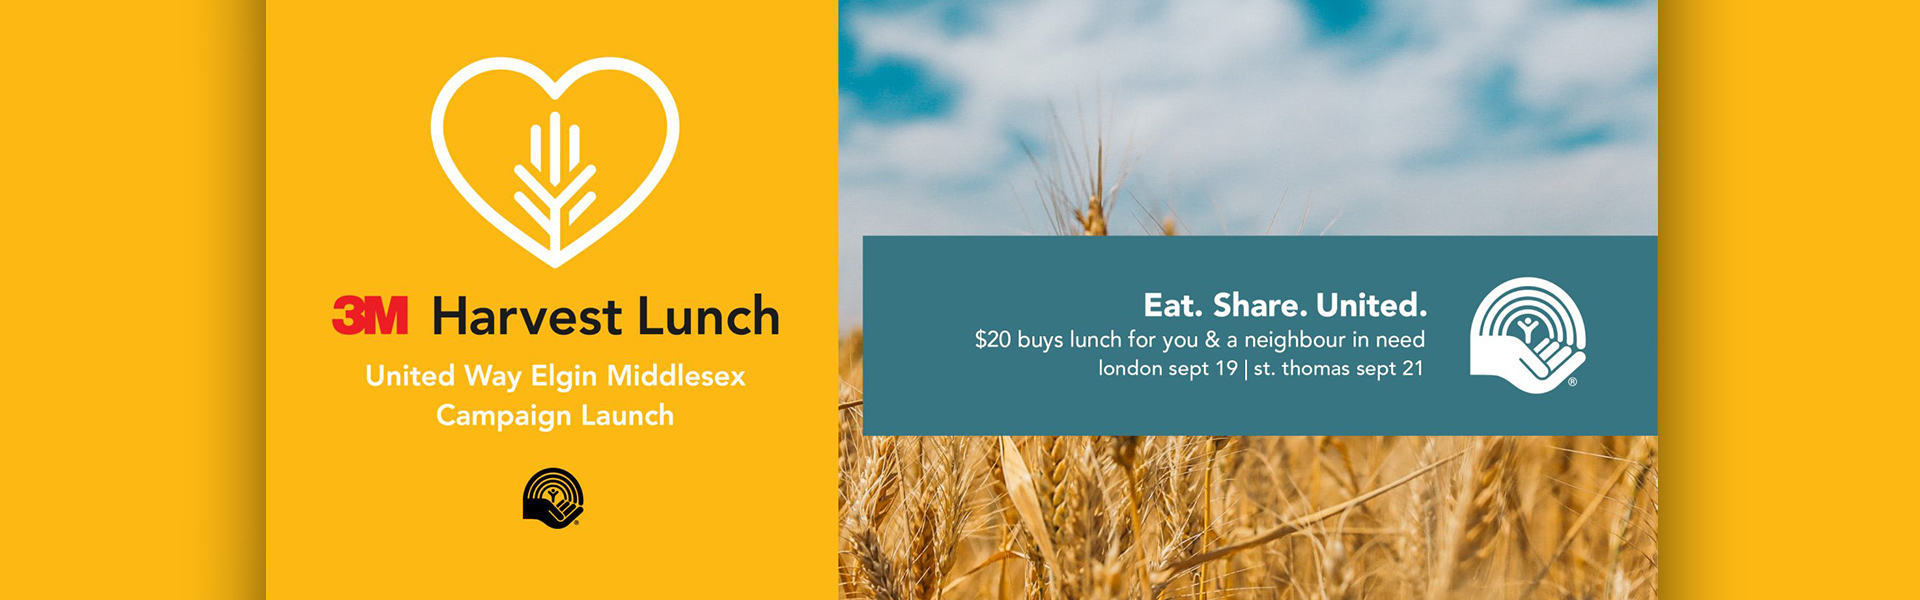 3M Harvest Lunch - United Way Elgin Middlesex Campaign Launch. Eat. Share. United. $20 buys lunch for you and a neighbour in need. London: September 19, St. Thomas: September 21